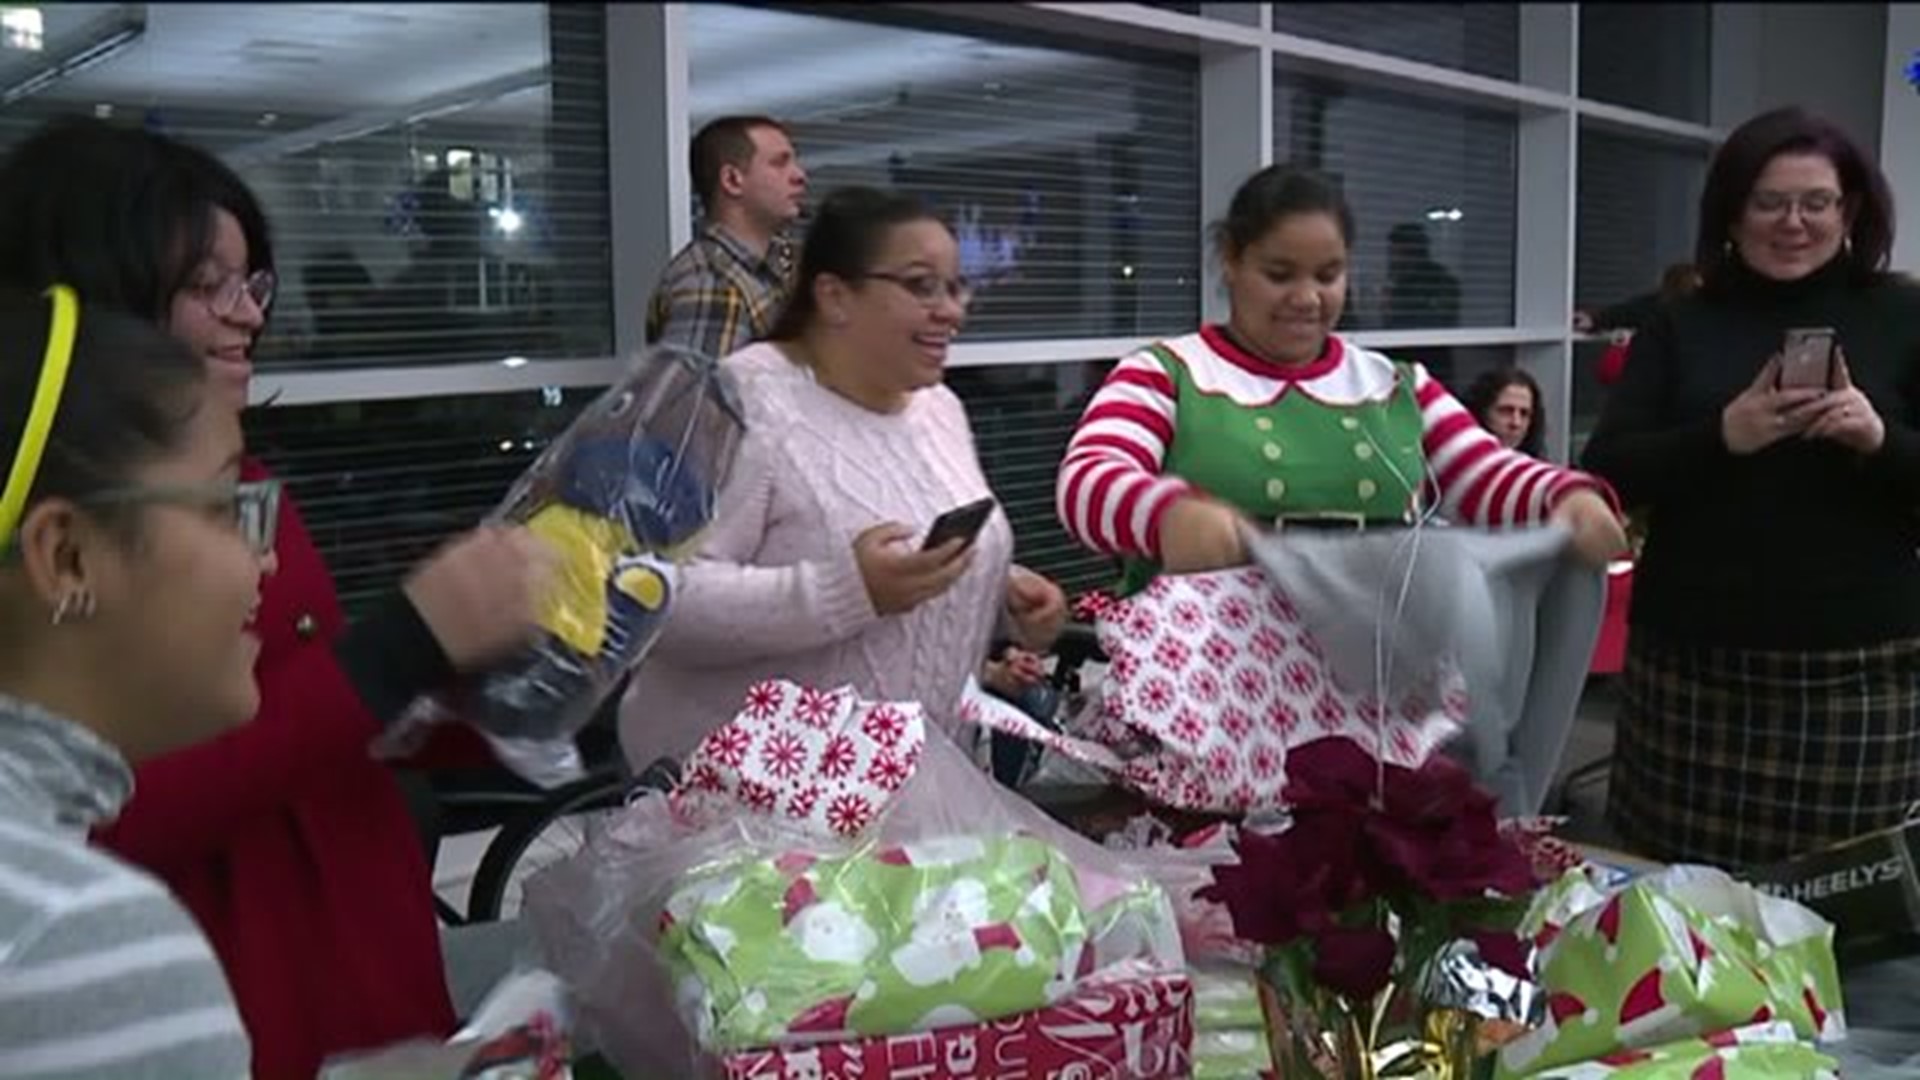 Christmas Gifts Given to Families in Need